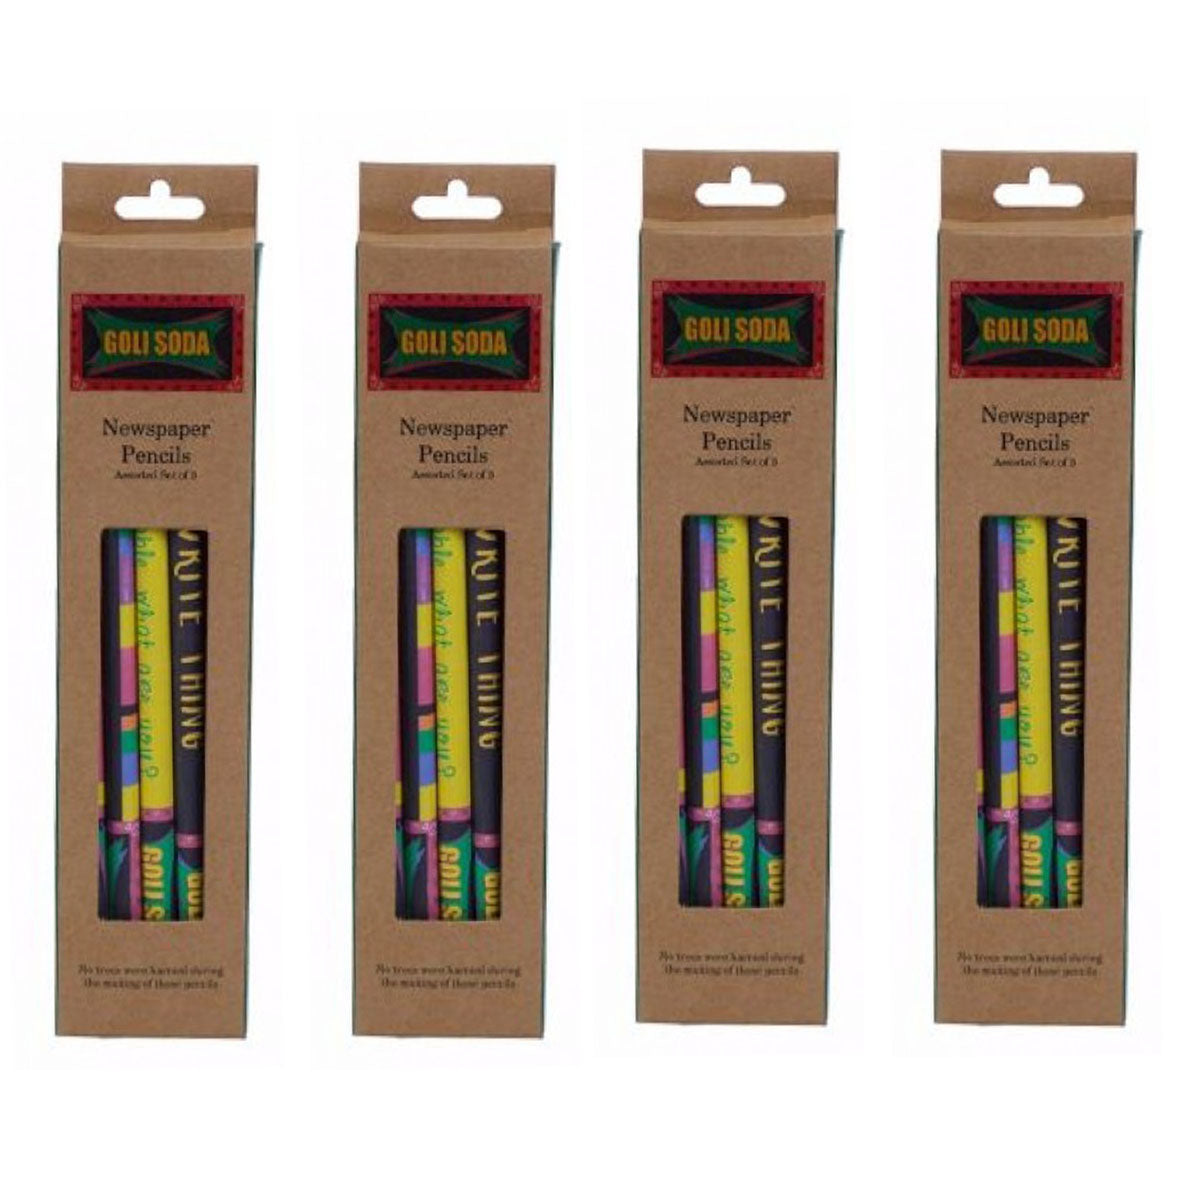 Upcycled Multicolor Newspaper Pencils